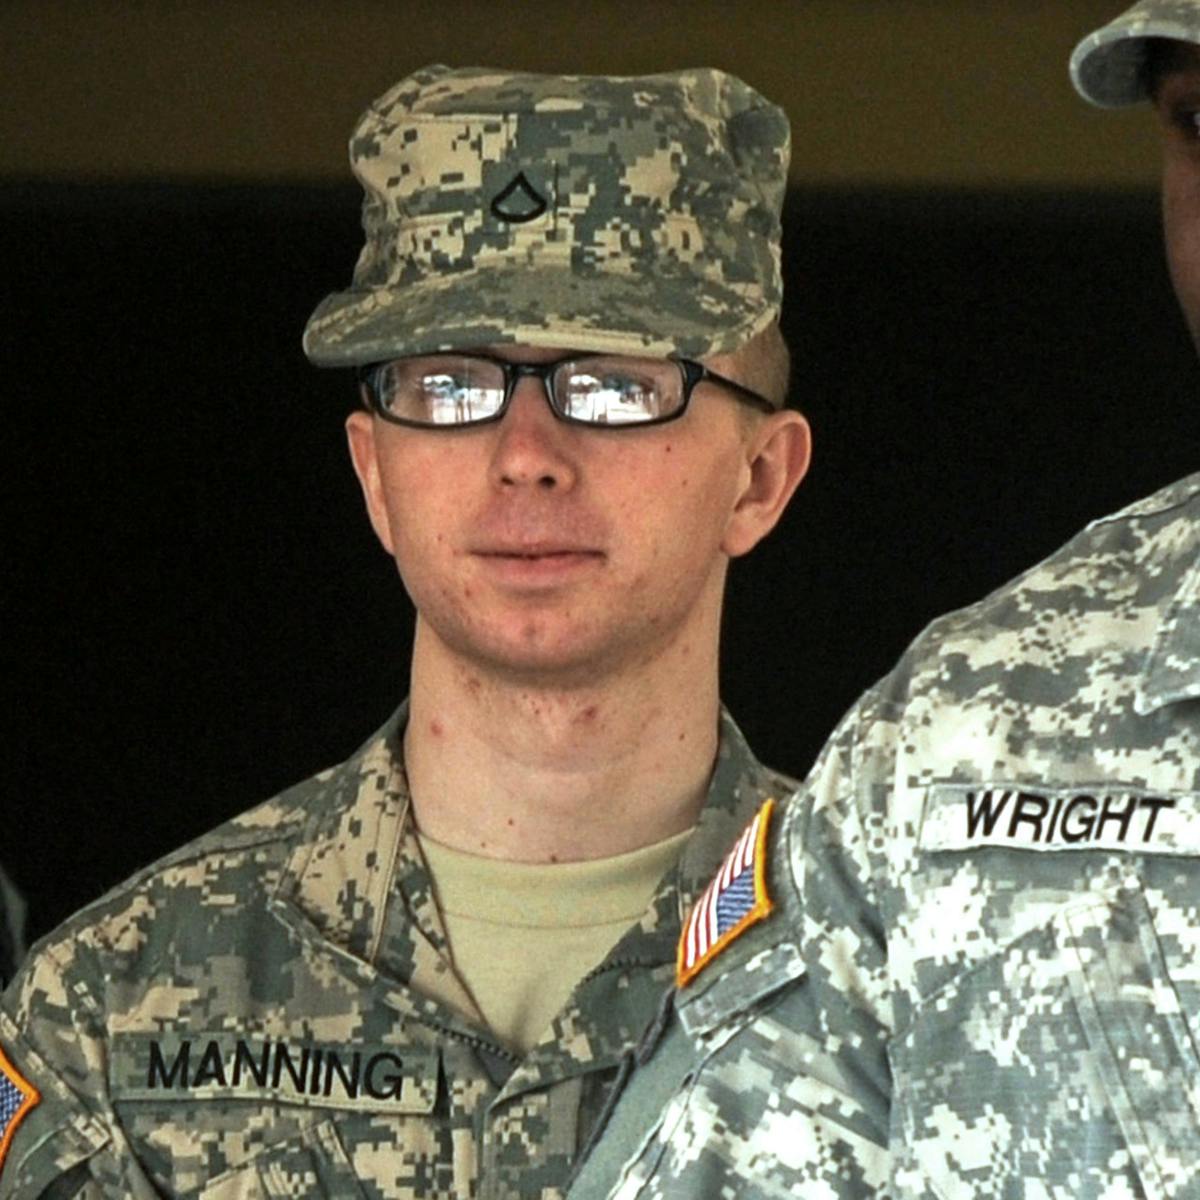 WikiLeaks and aiding the enemy: the court martial of Bradley Manning